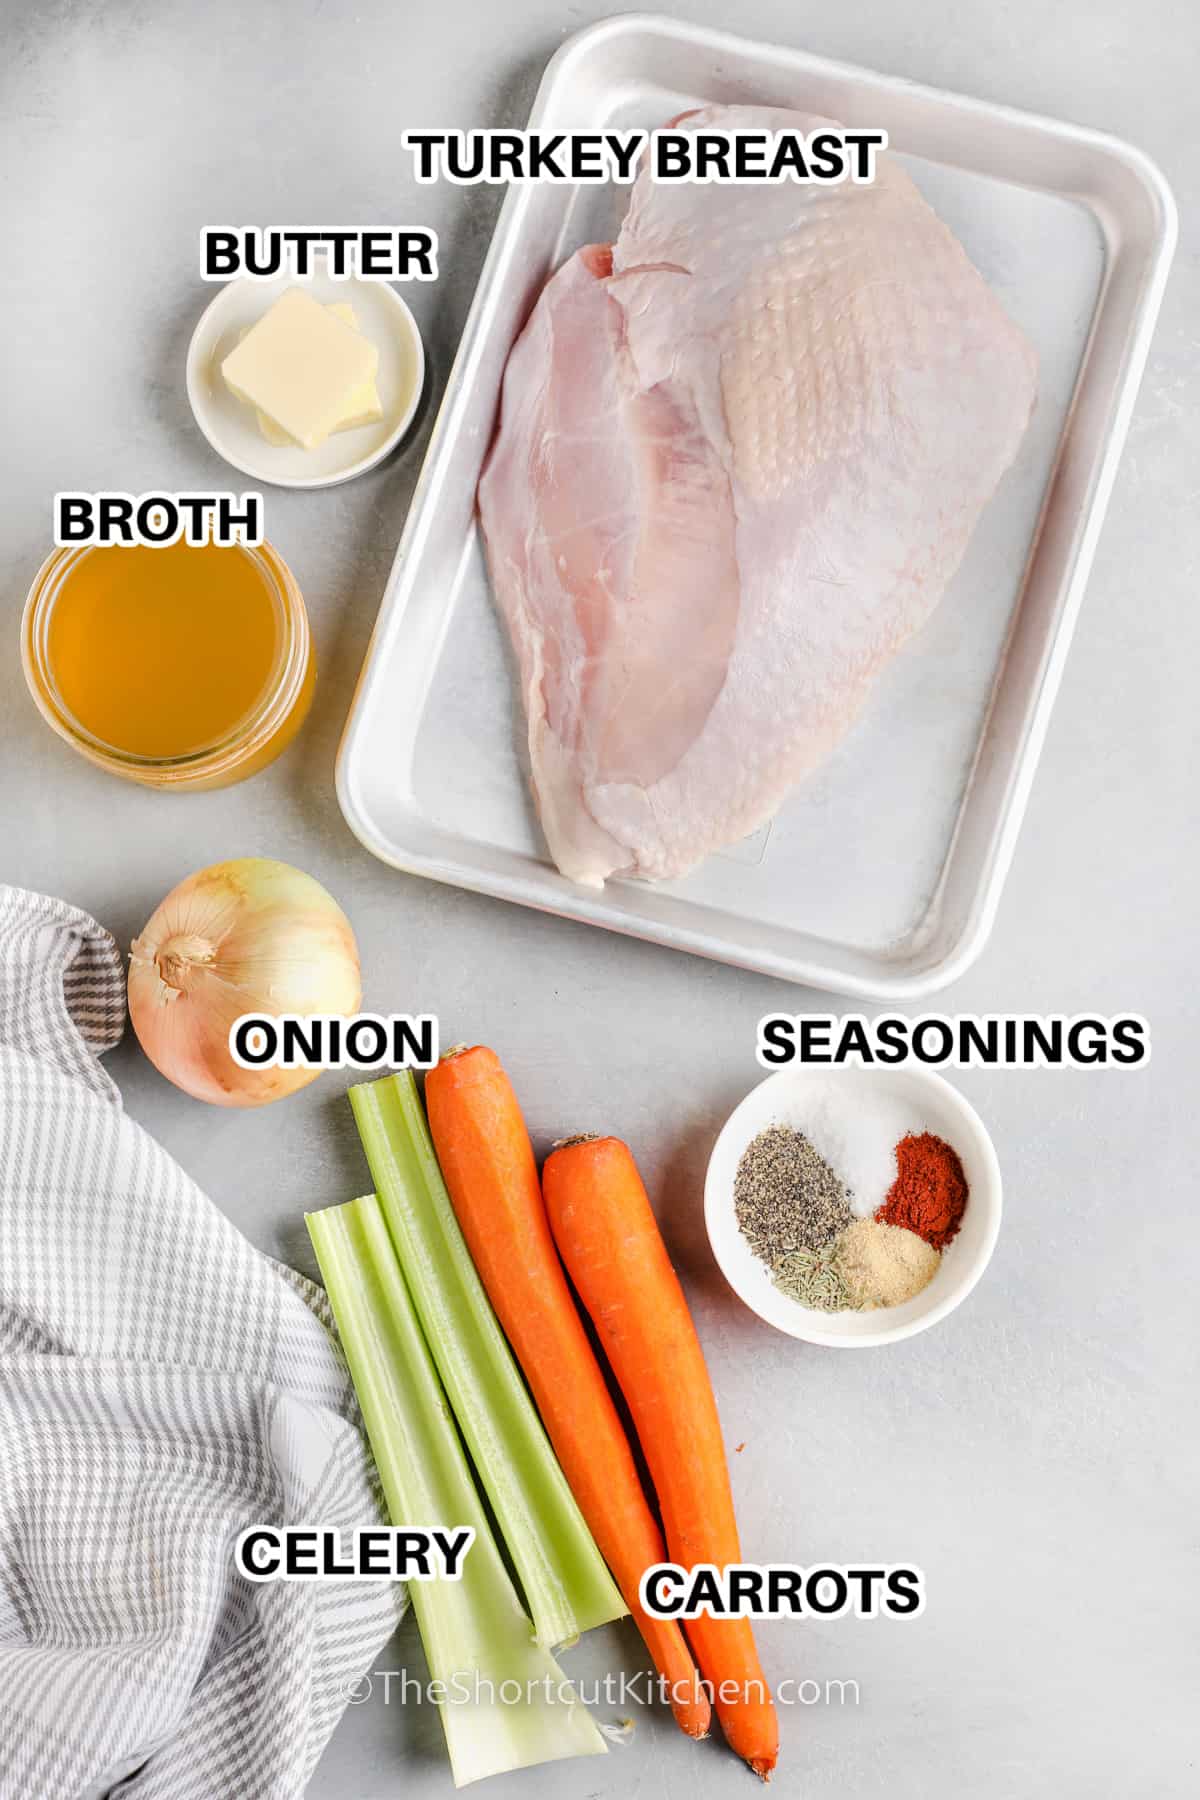 ingredients for crockpot turkey breast including turkey breast, butter, broth, onion, seasonings, carrots, and celery